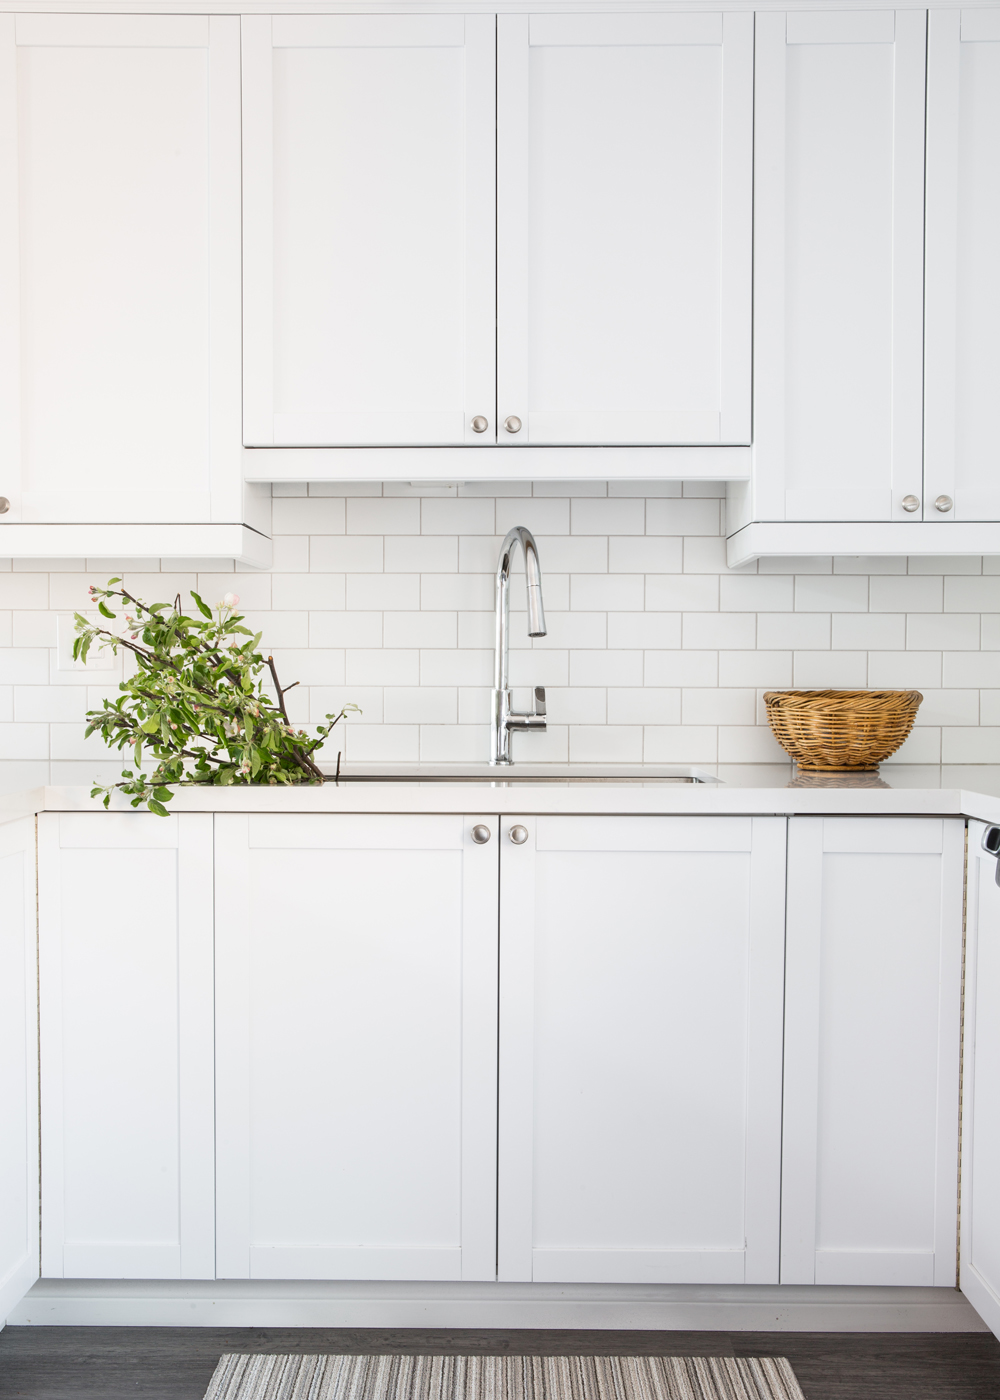 white kitchen cabinetry with round metal knobs, single sink faucets, greens in sink, wicker basket on counter